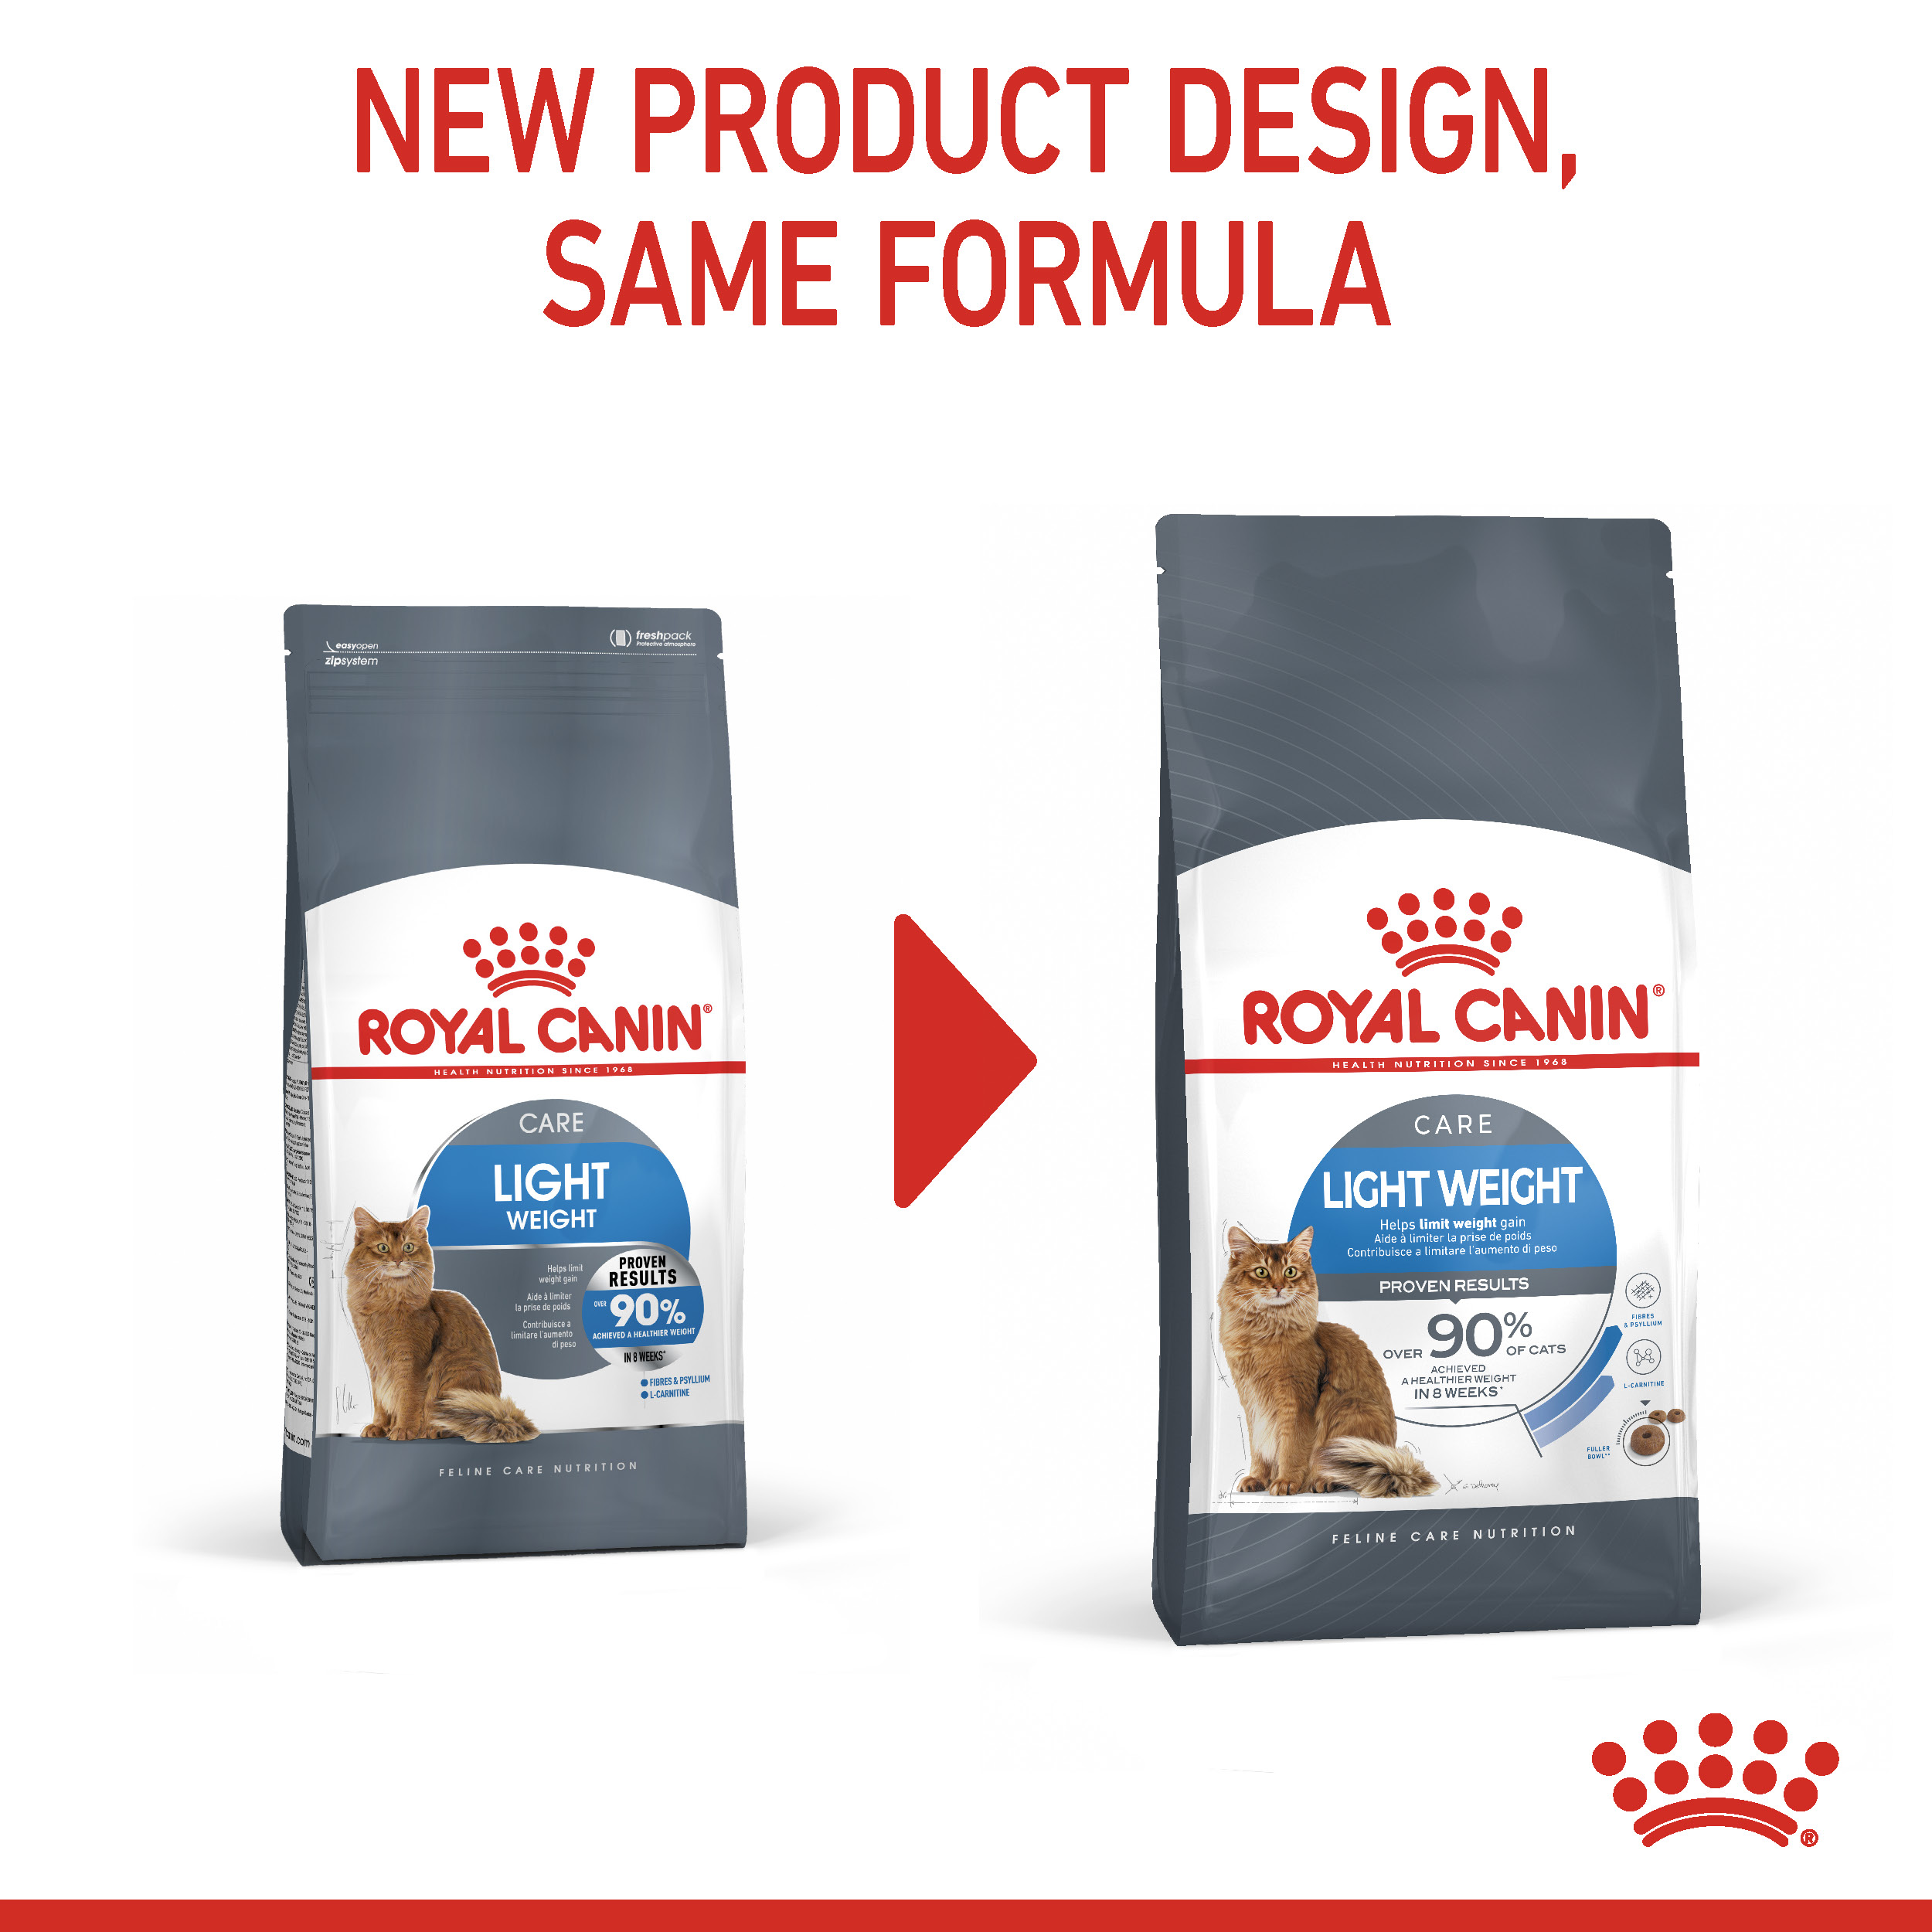 Light Weight Care Cat Products | Royal Canin Shop